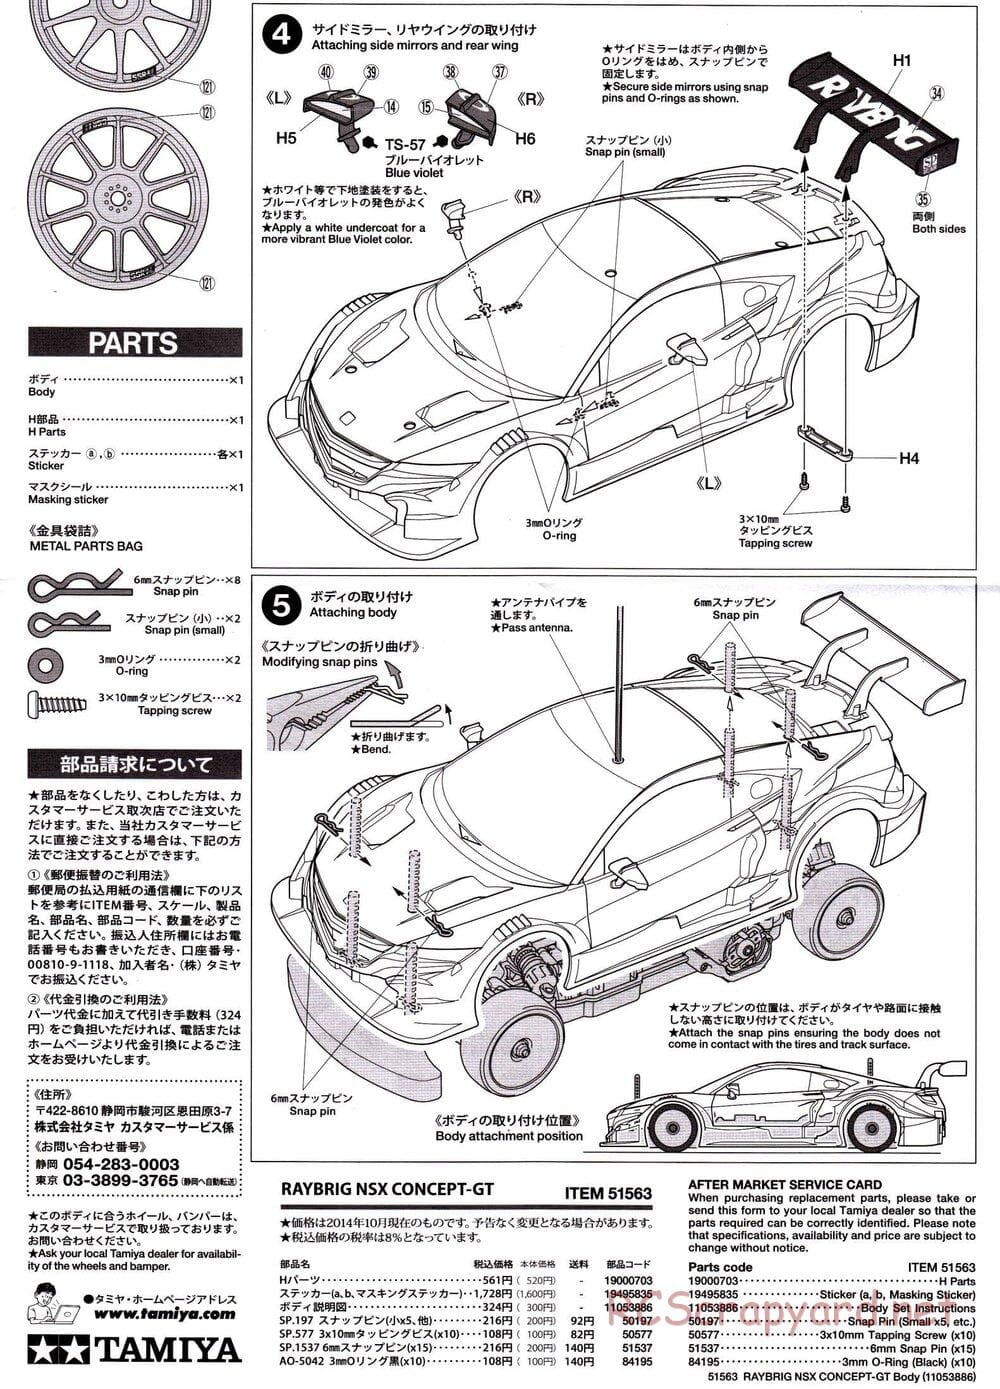 Tamiya - Raybrig NSX Concept-GT - TT-02 Chassis - Body Manual - Page 4